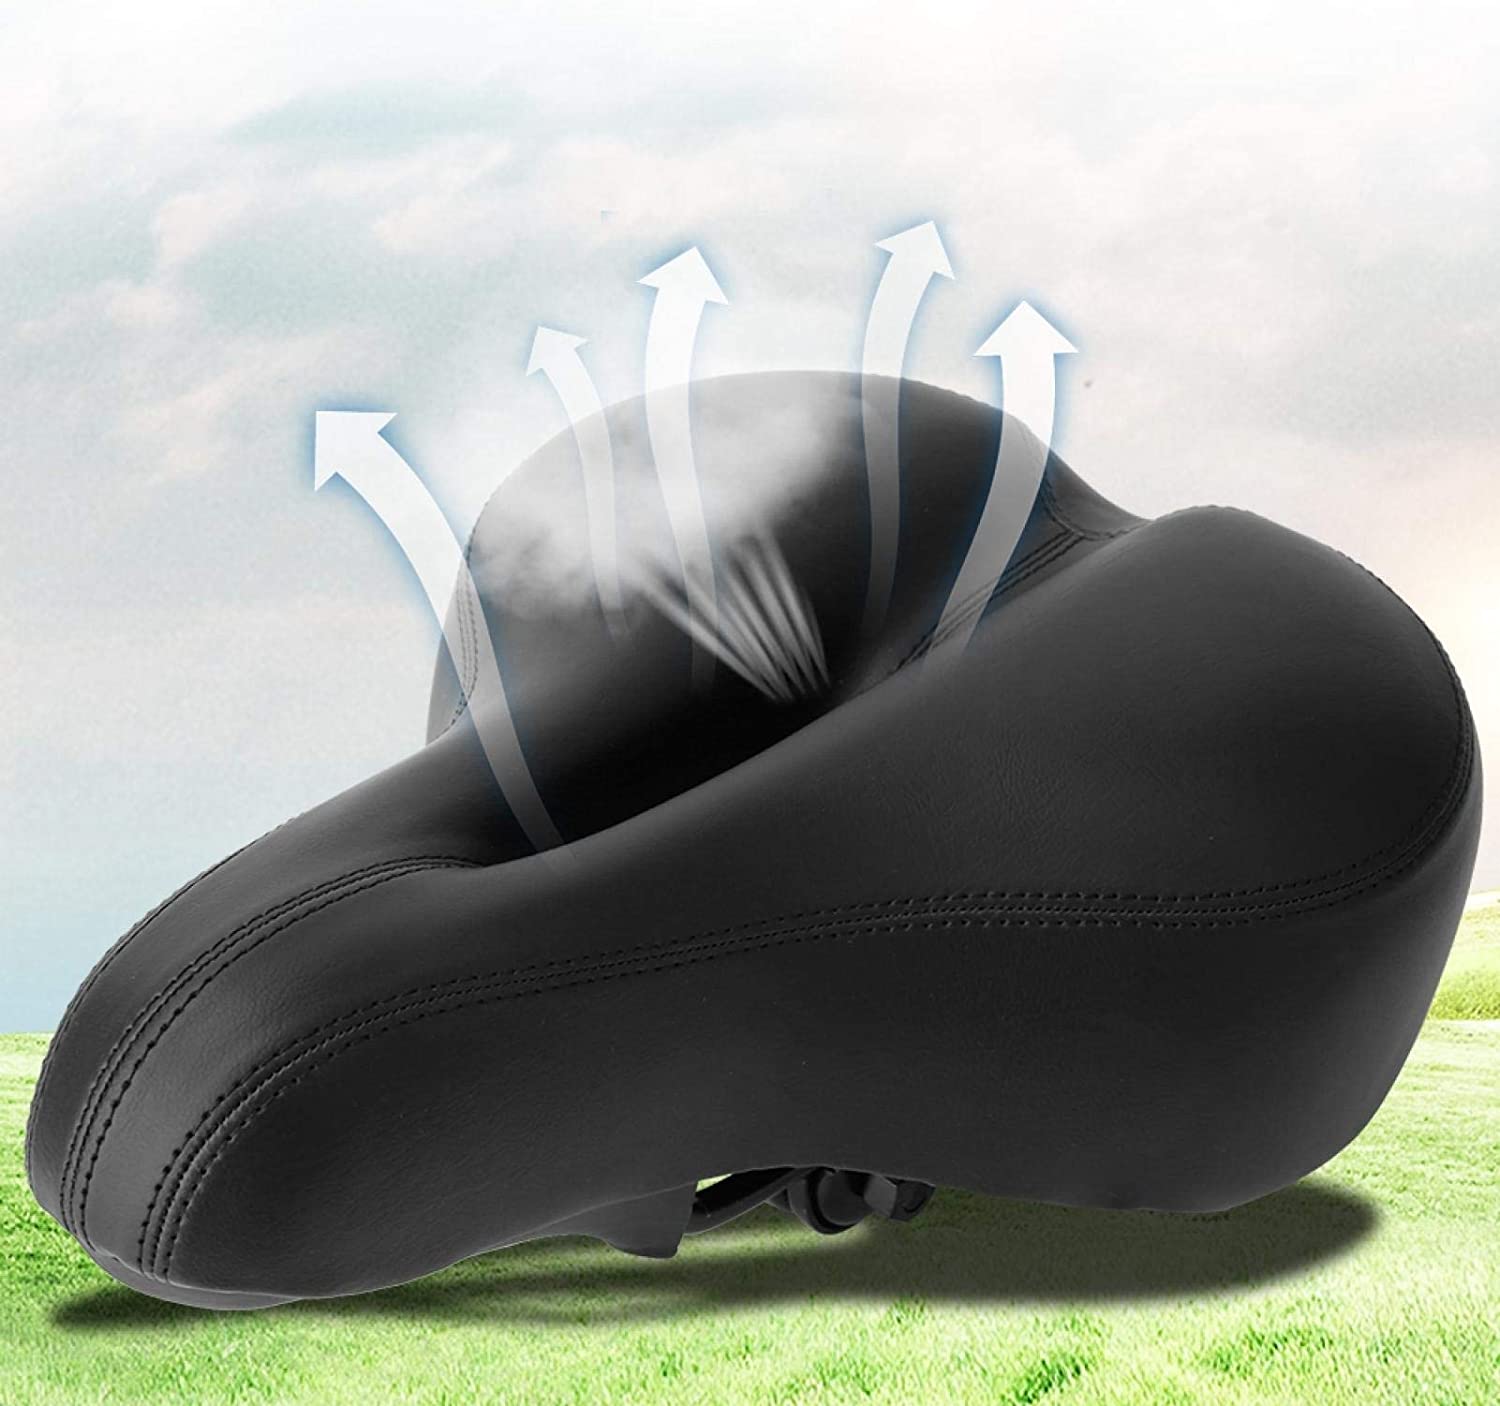 Trekking bike seats are designed differently to mountain bike seats in that they allow for a greater amount of pressure relief.